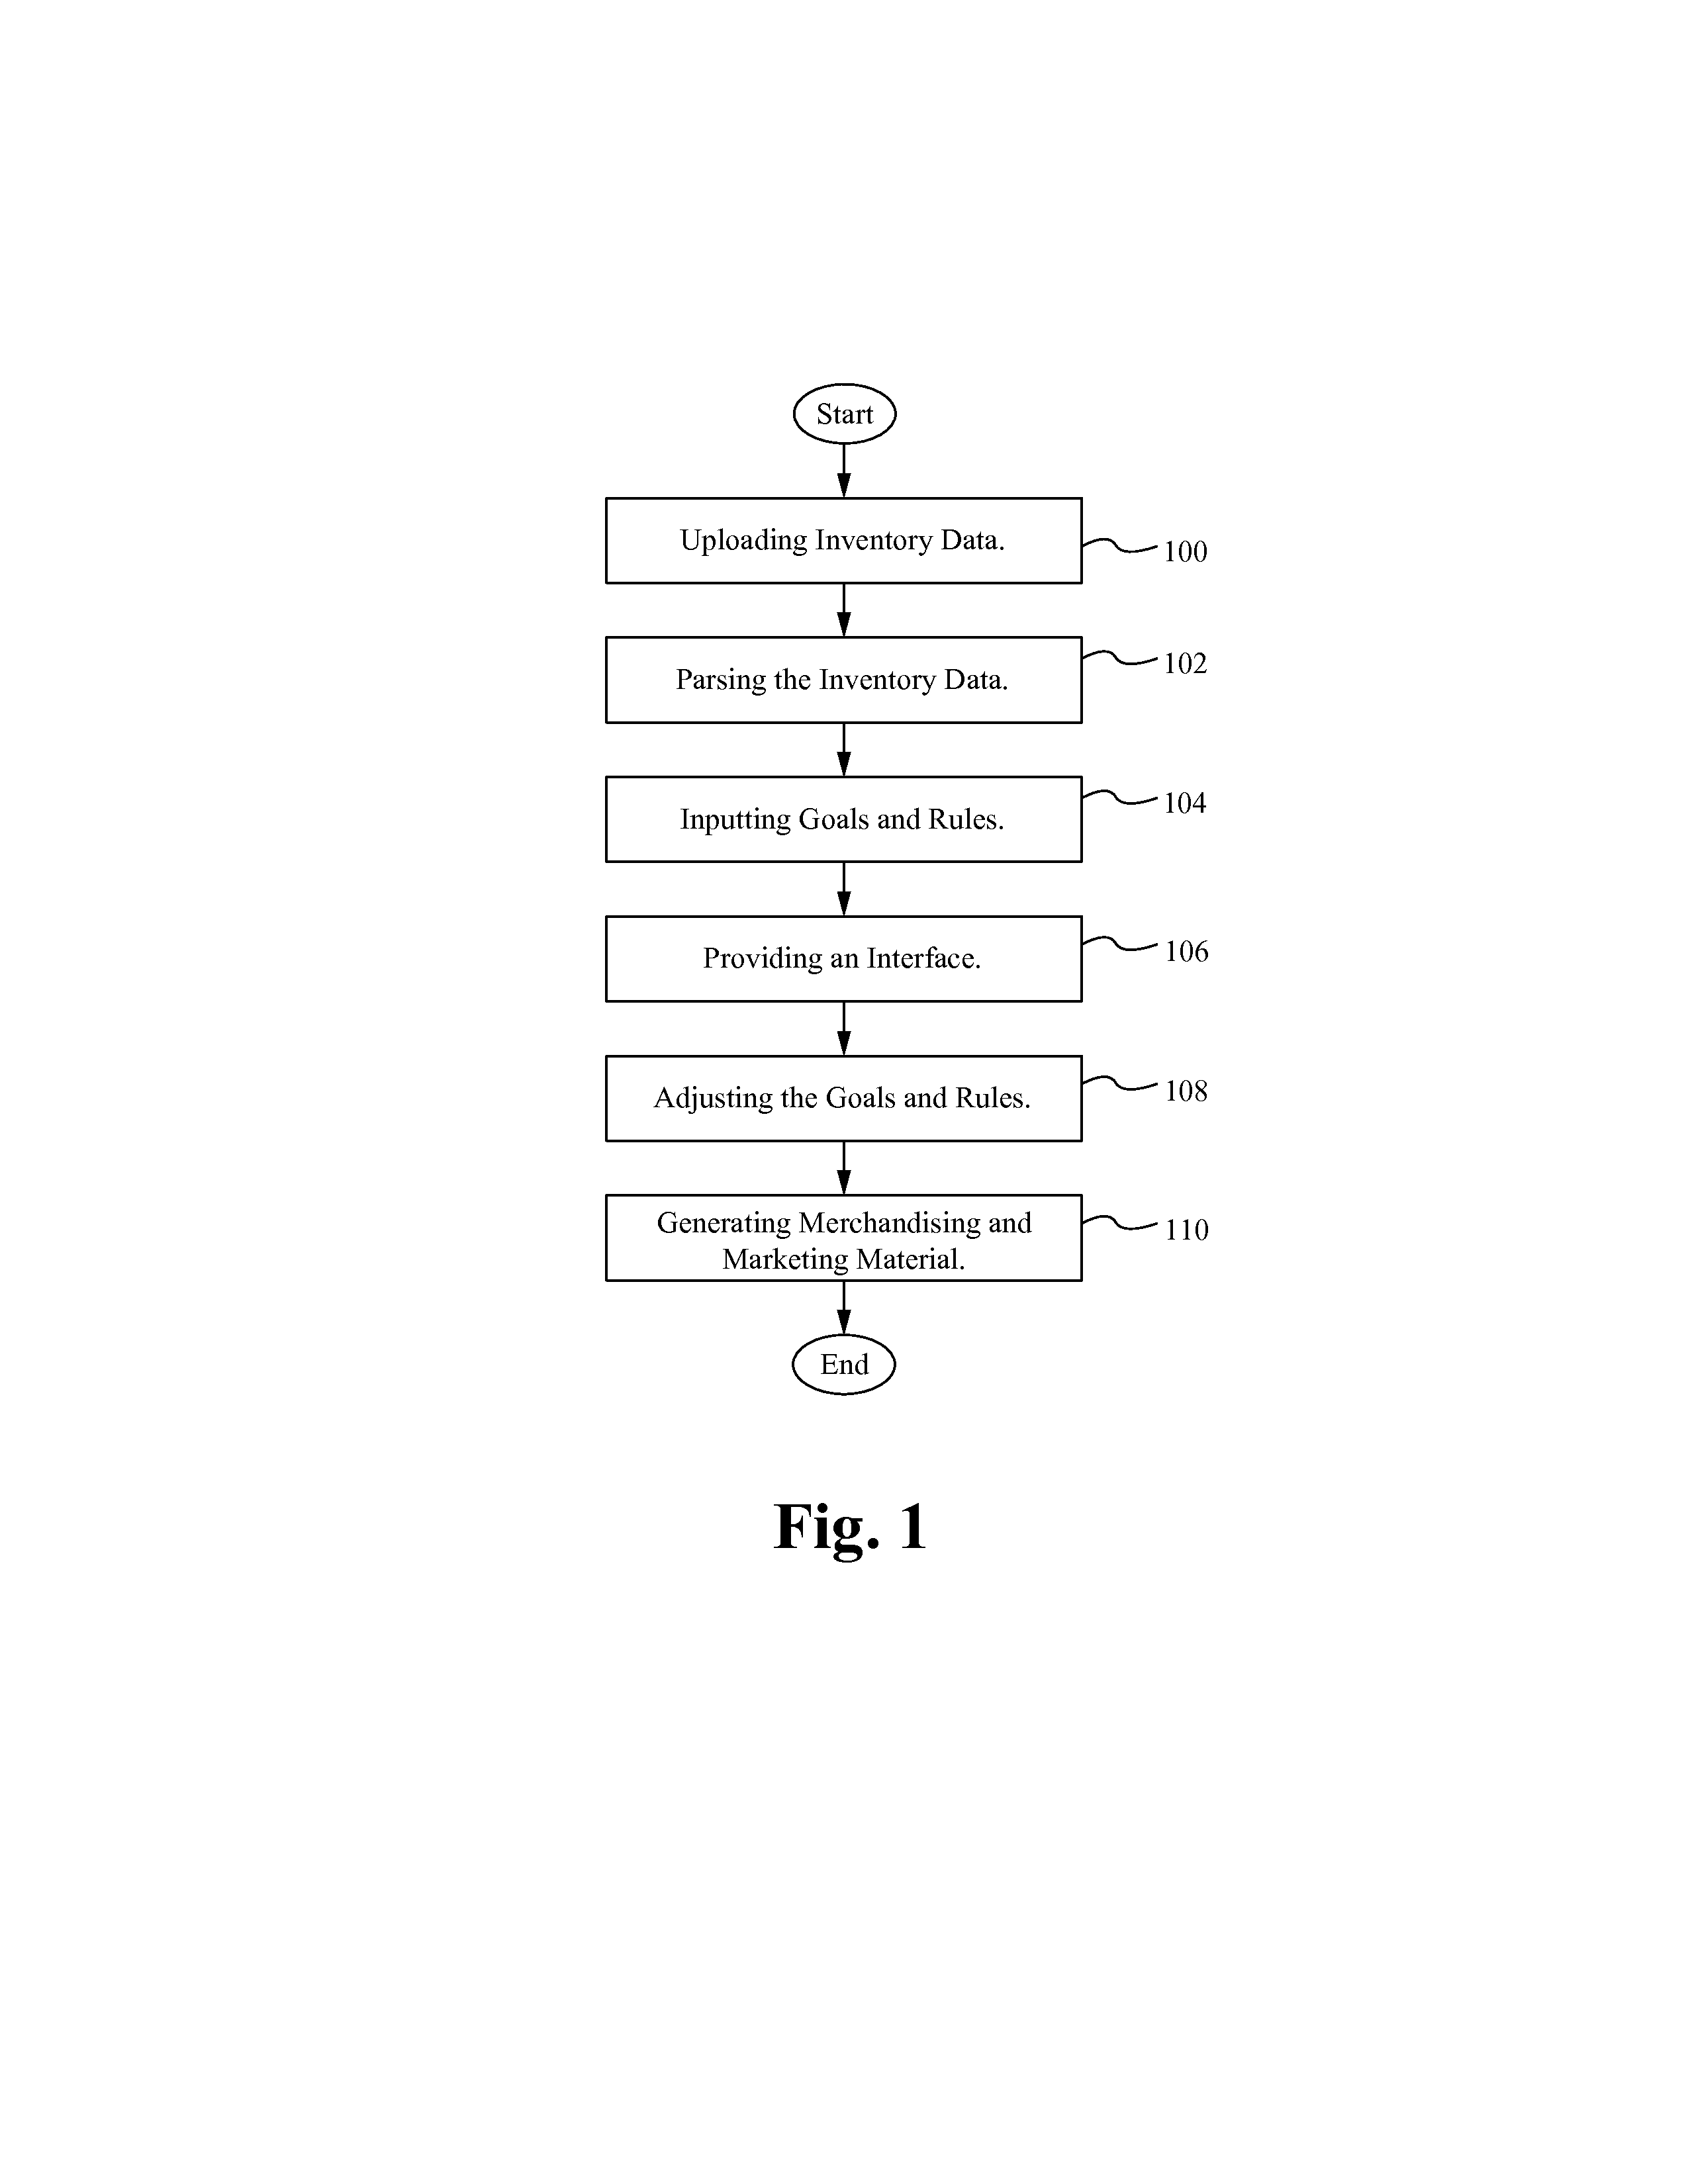 System for and method of managing book sales and rentals